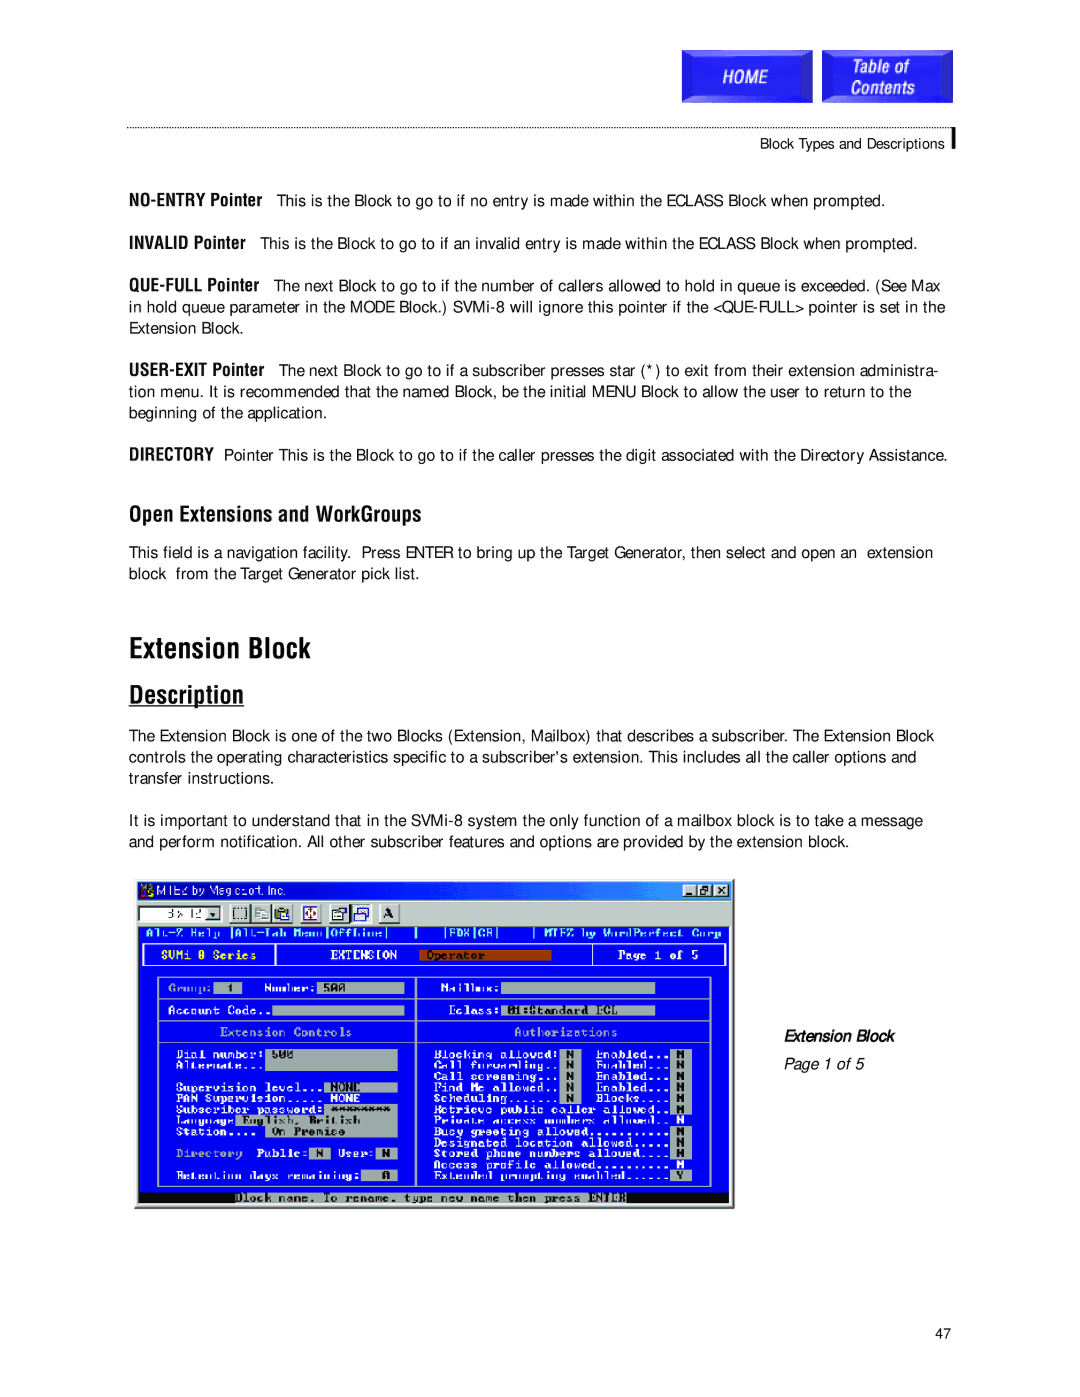 Samsung SVMi-8 technical manual Extension Block, Open Extensions and WorkGroups 